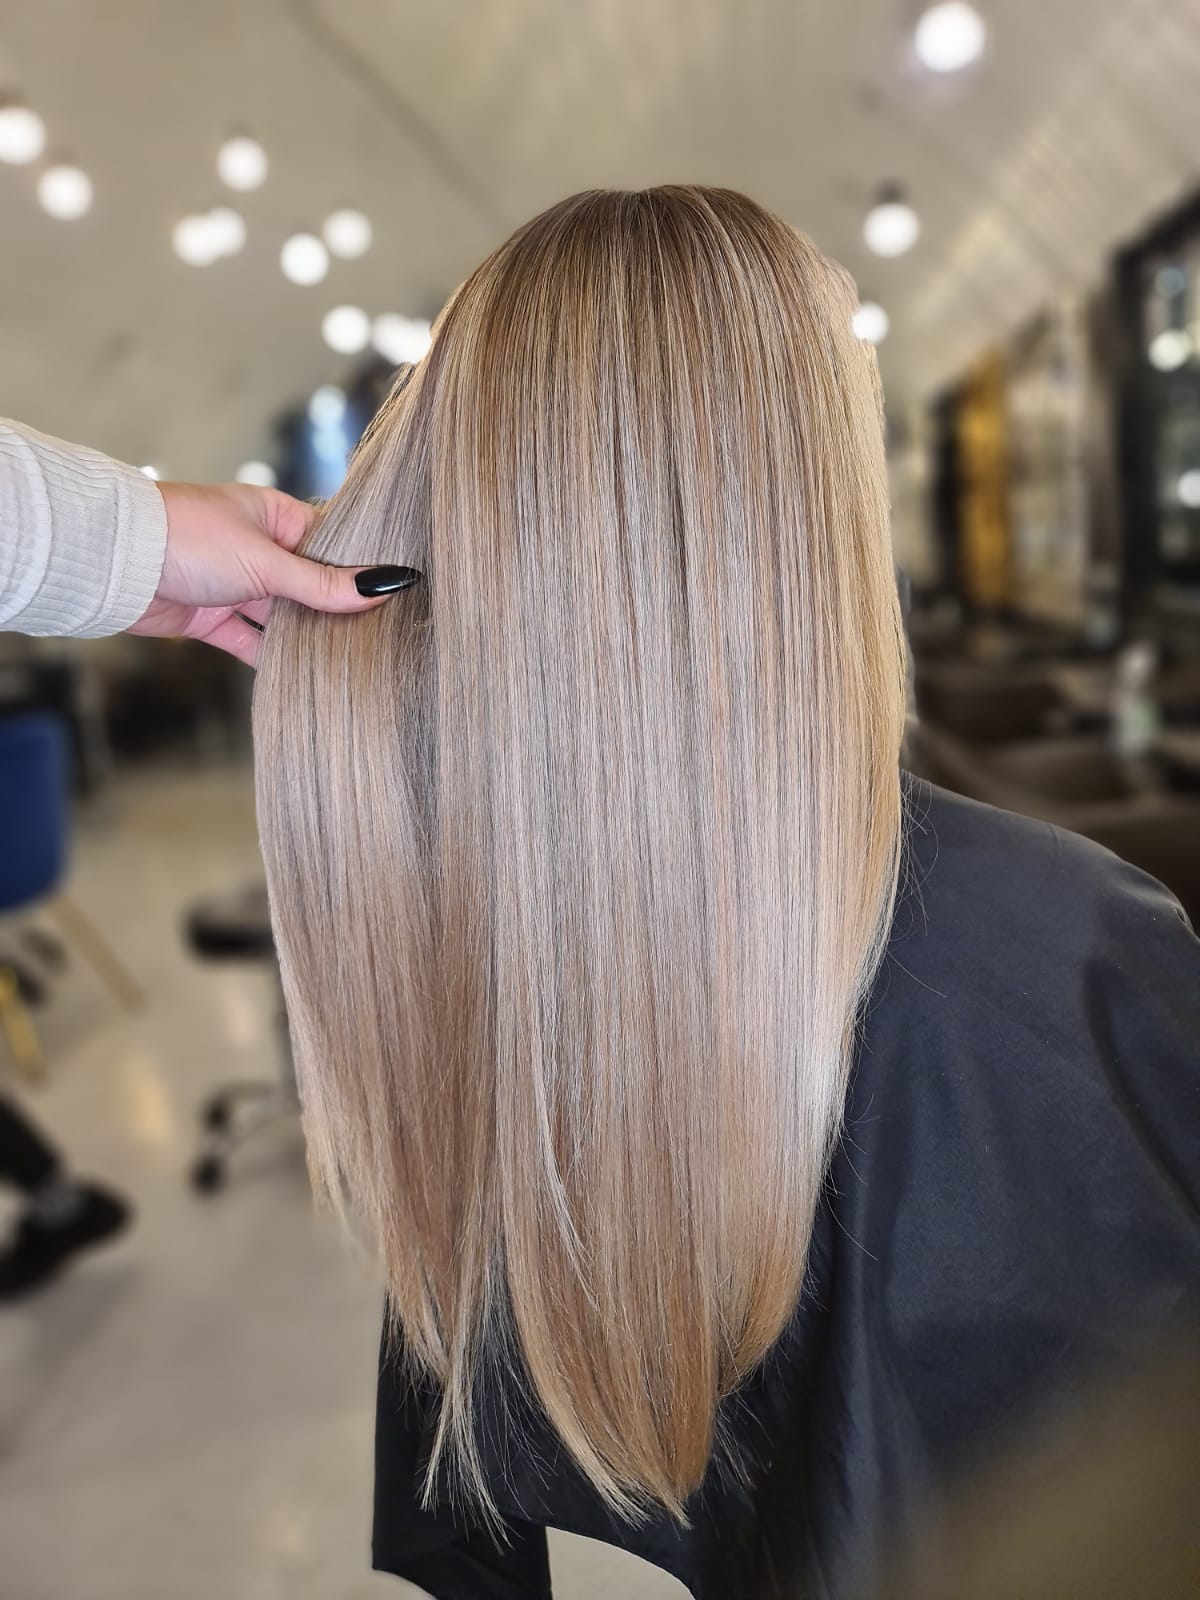 Blow Dry Styles - Hair Style Inspiration | Live True London